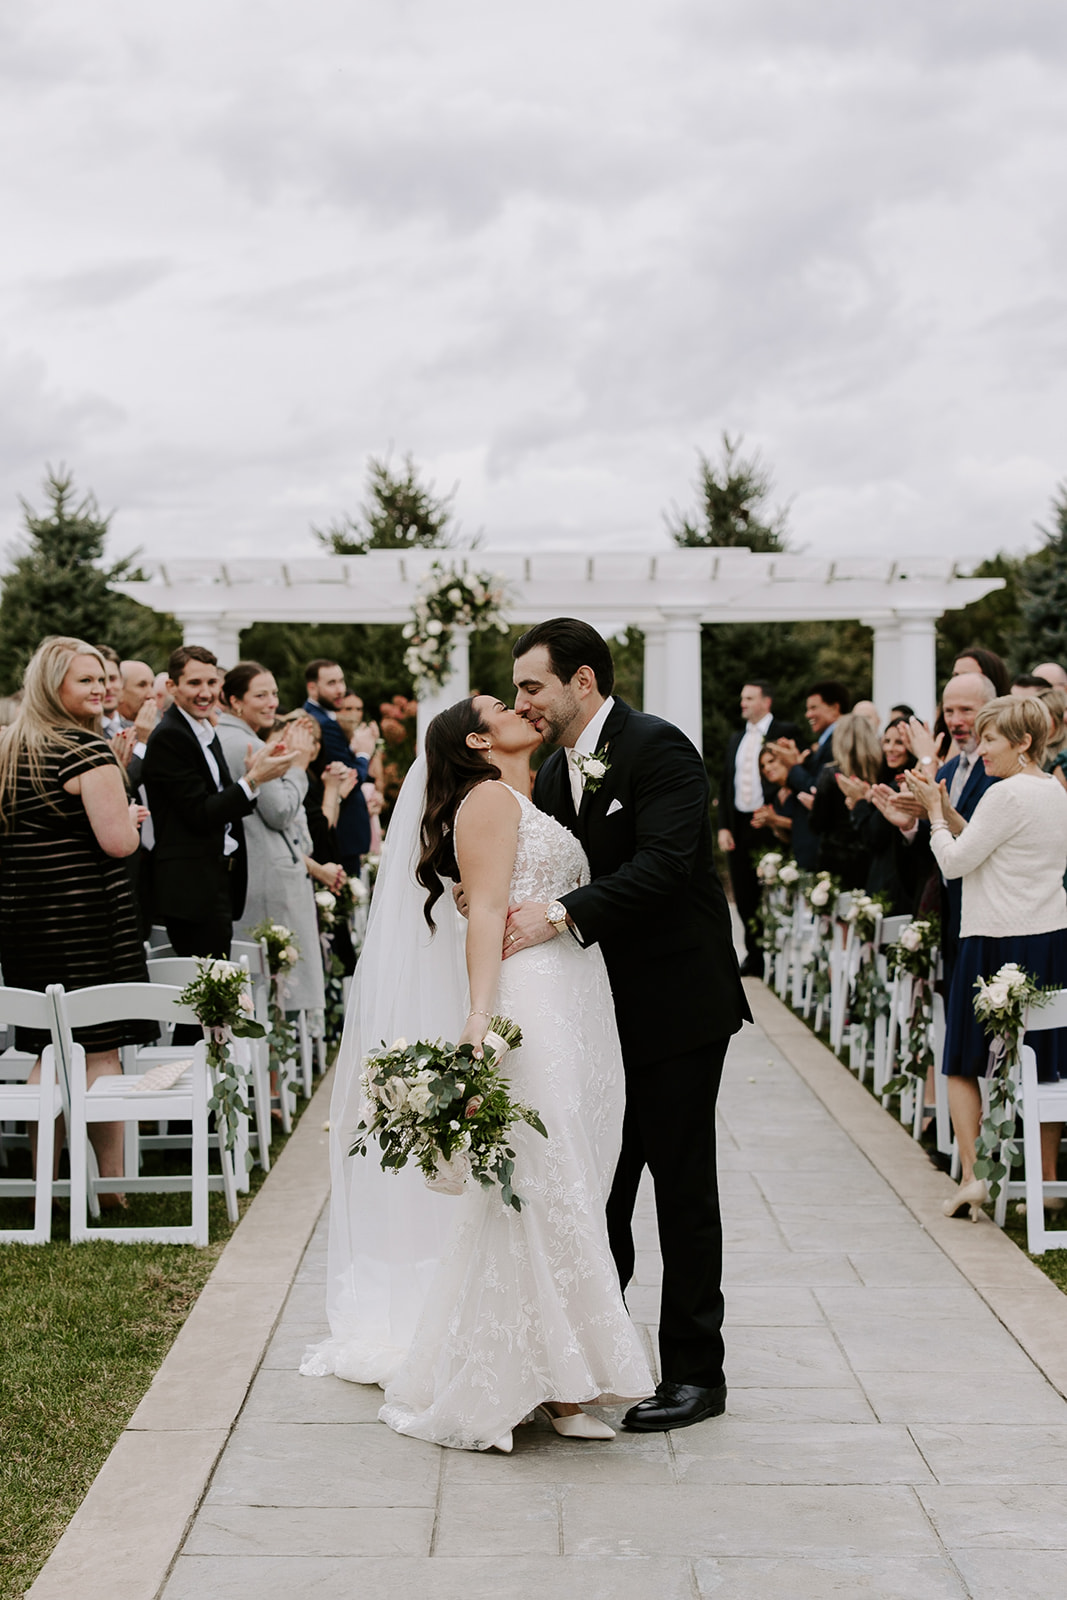 Stunning bride and groom exit their perfect New England